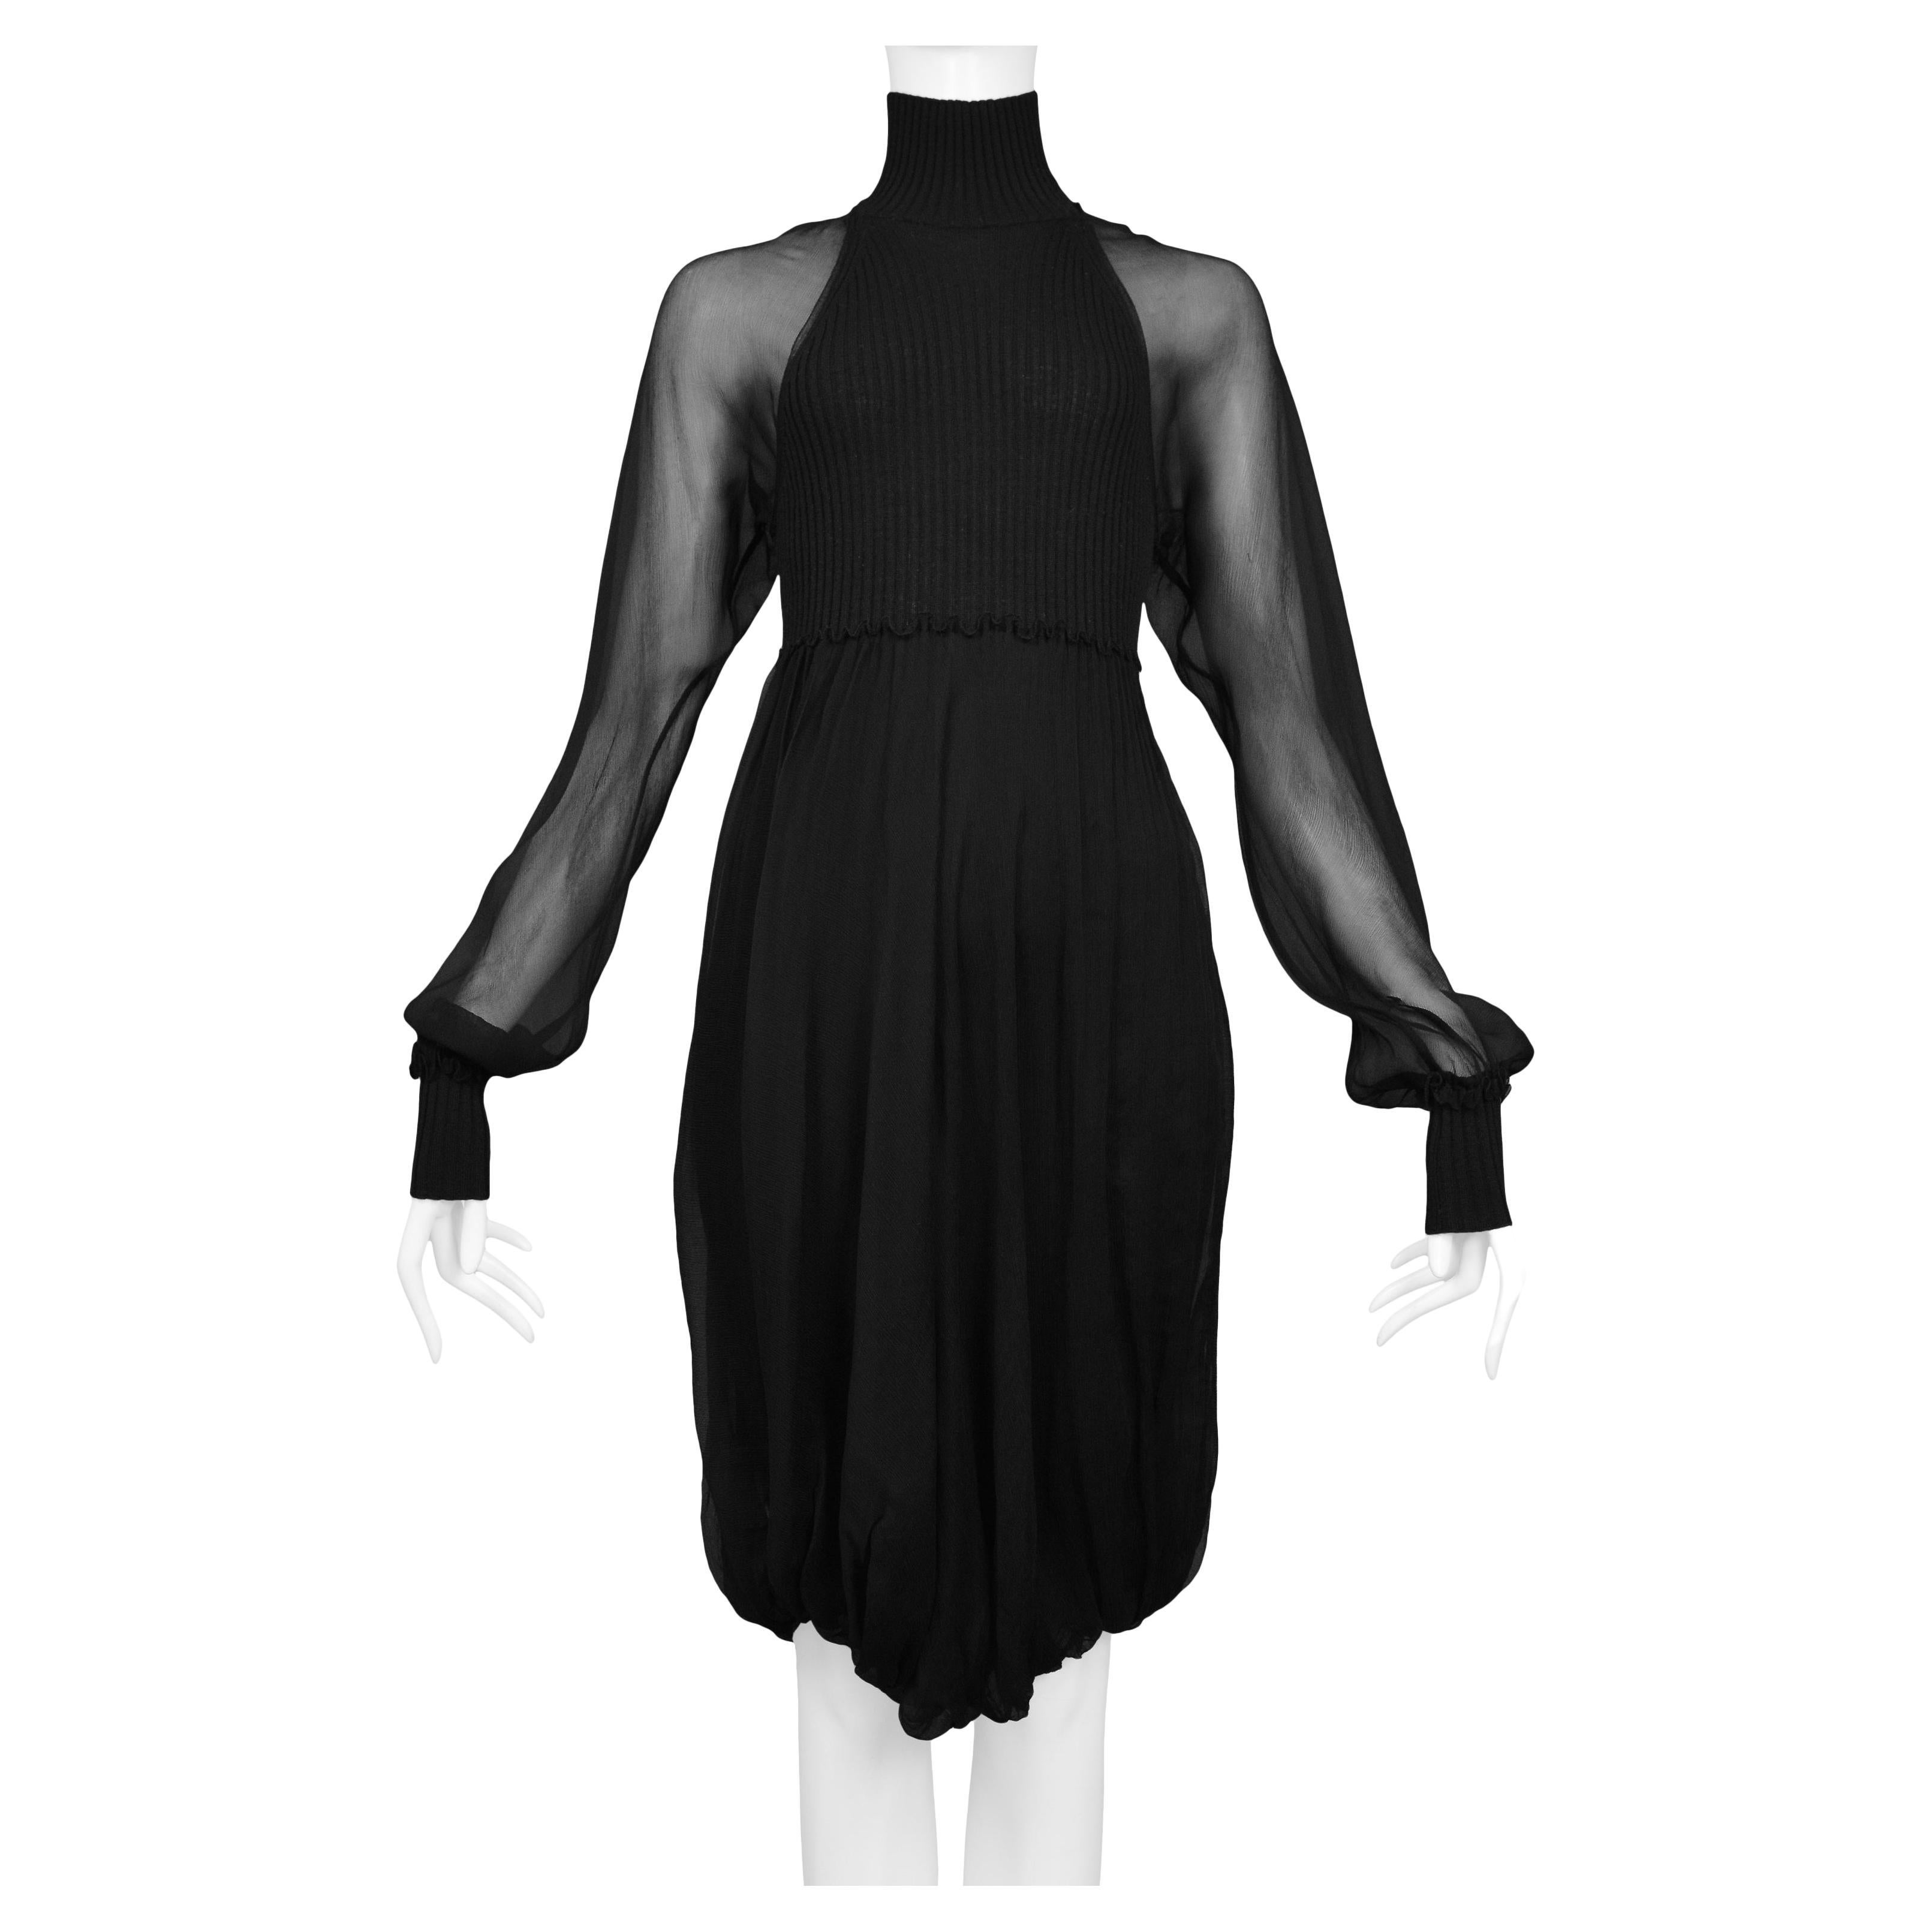 Jean Paul Gaultier Black Knit Illusion Dress With Chiffon Overlay & Sleeves For Sale